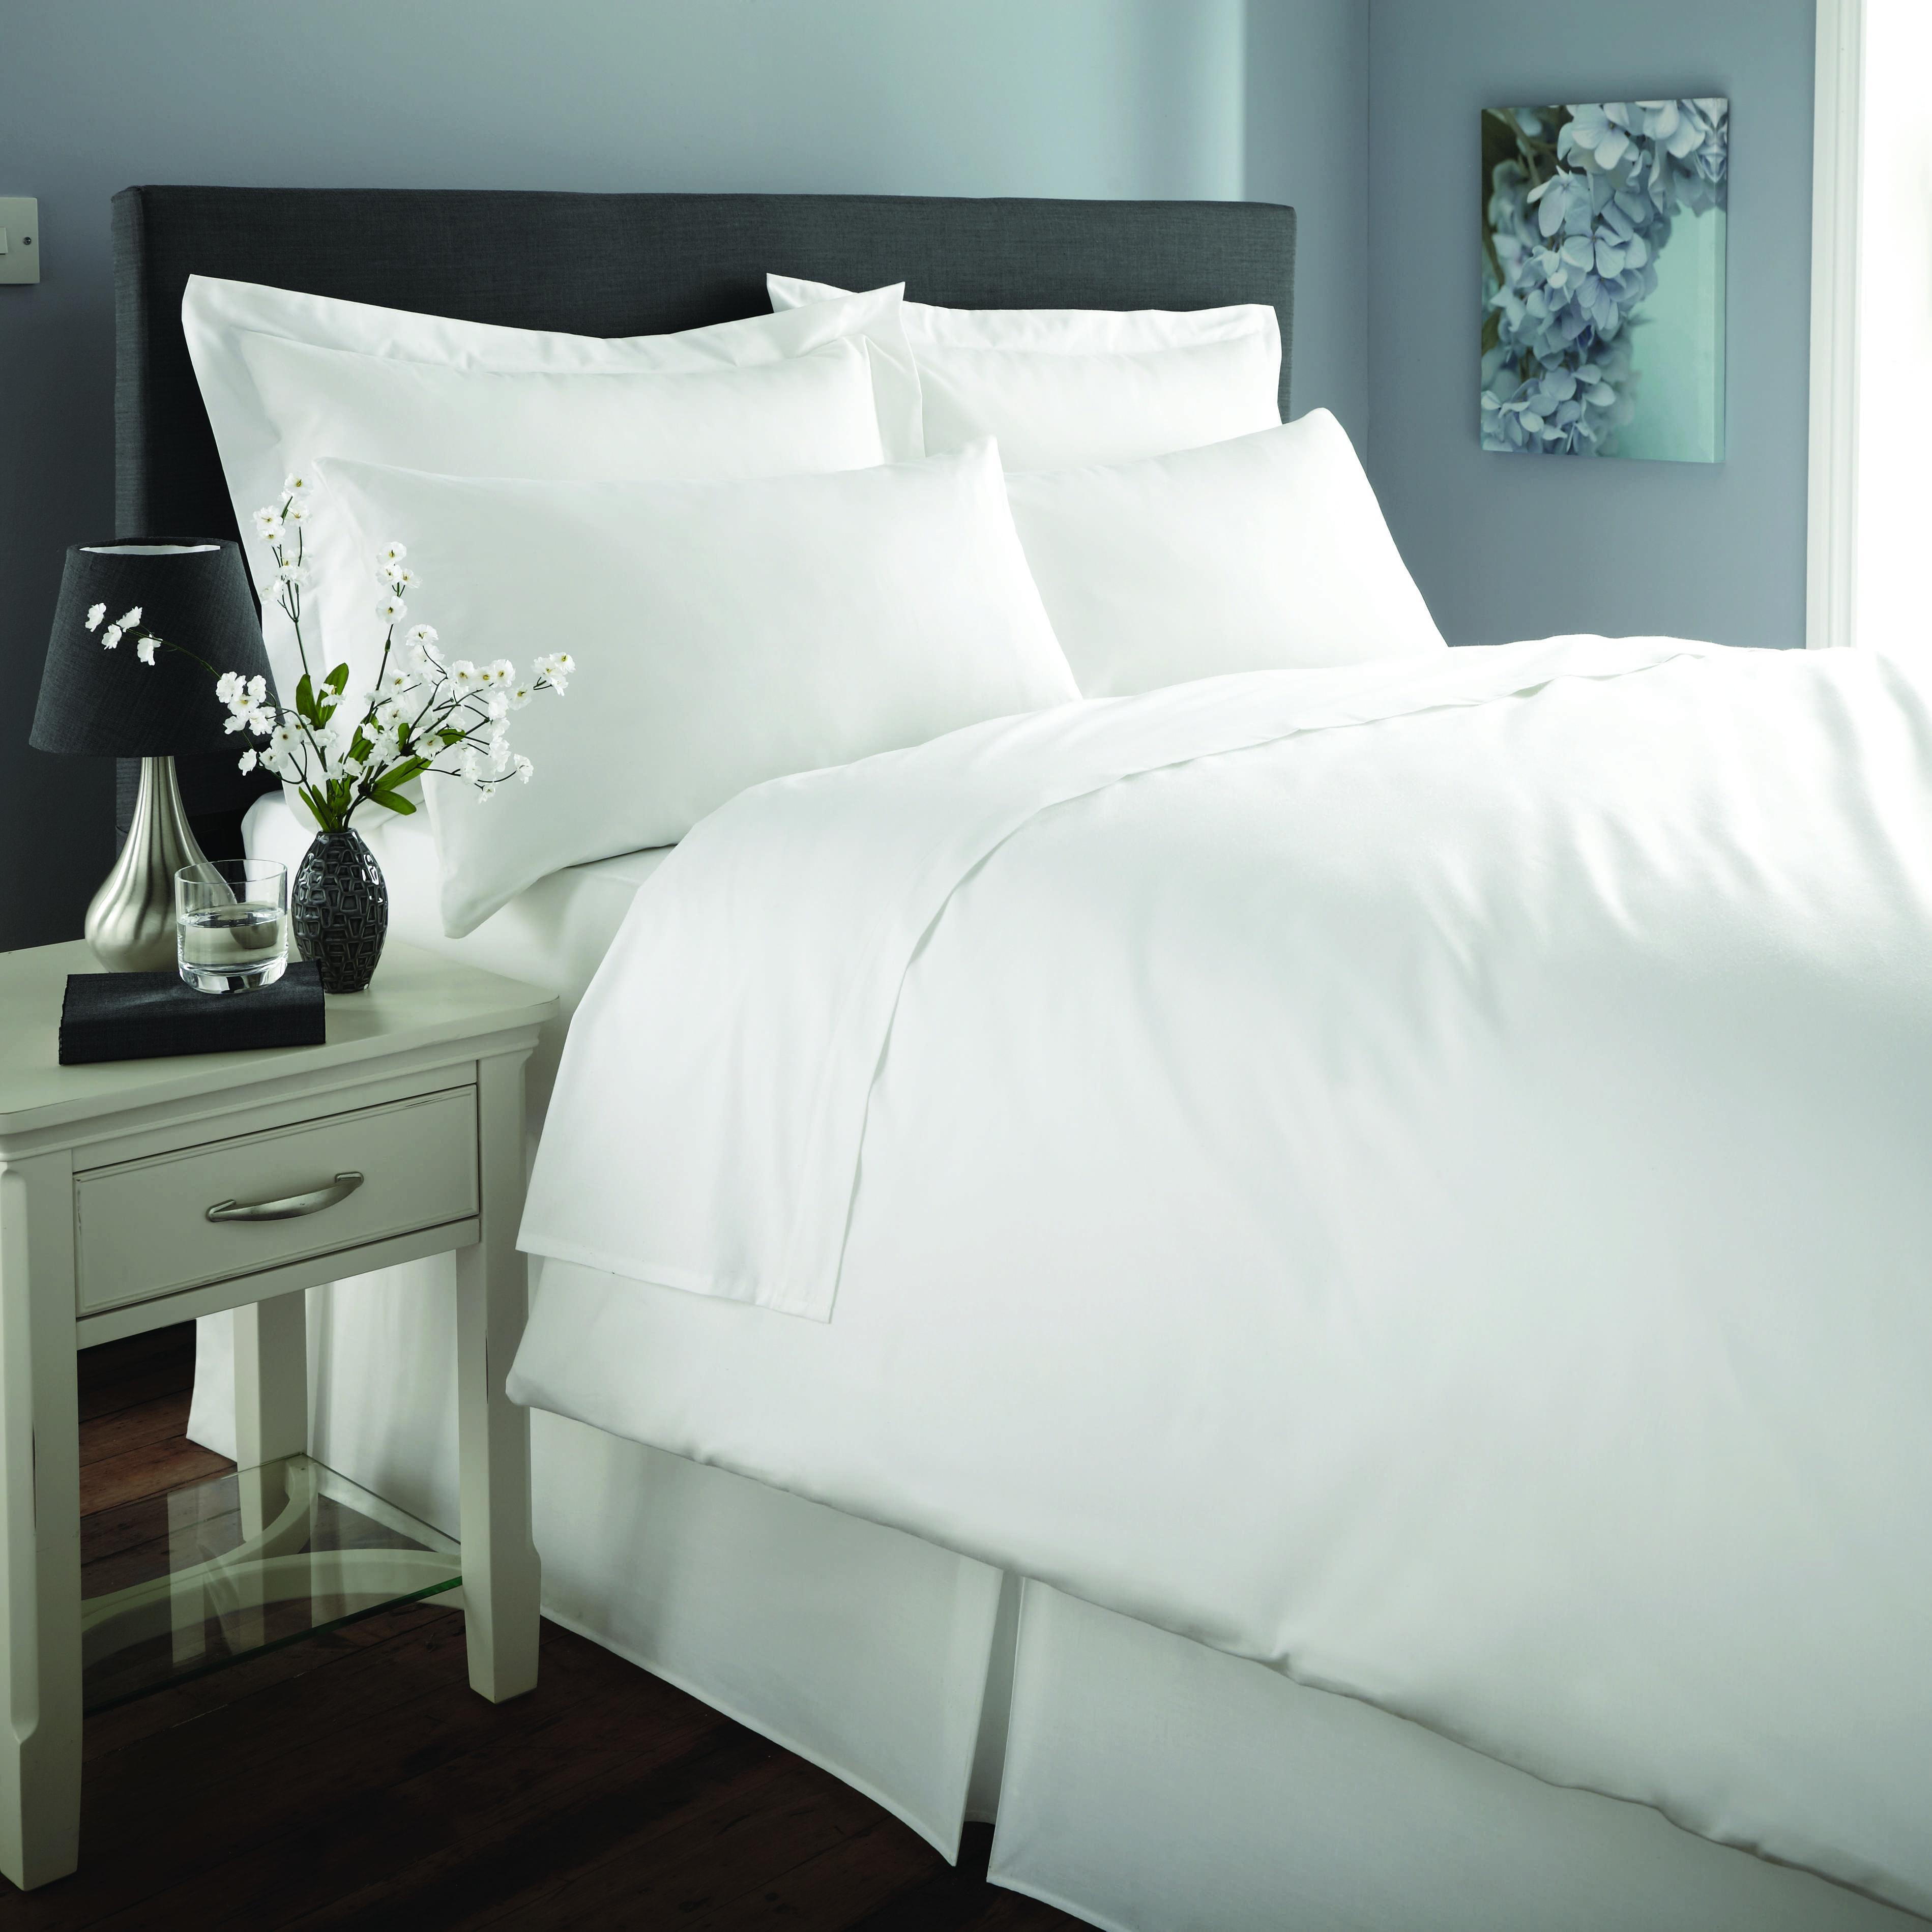 Musbury 100% Pure Cotton Hotel Double Flat Sheet In White 